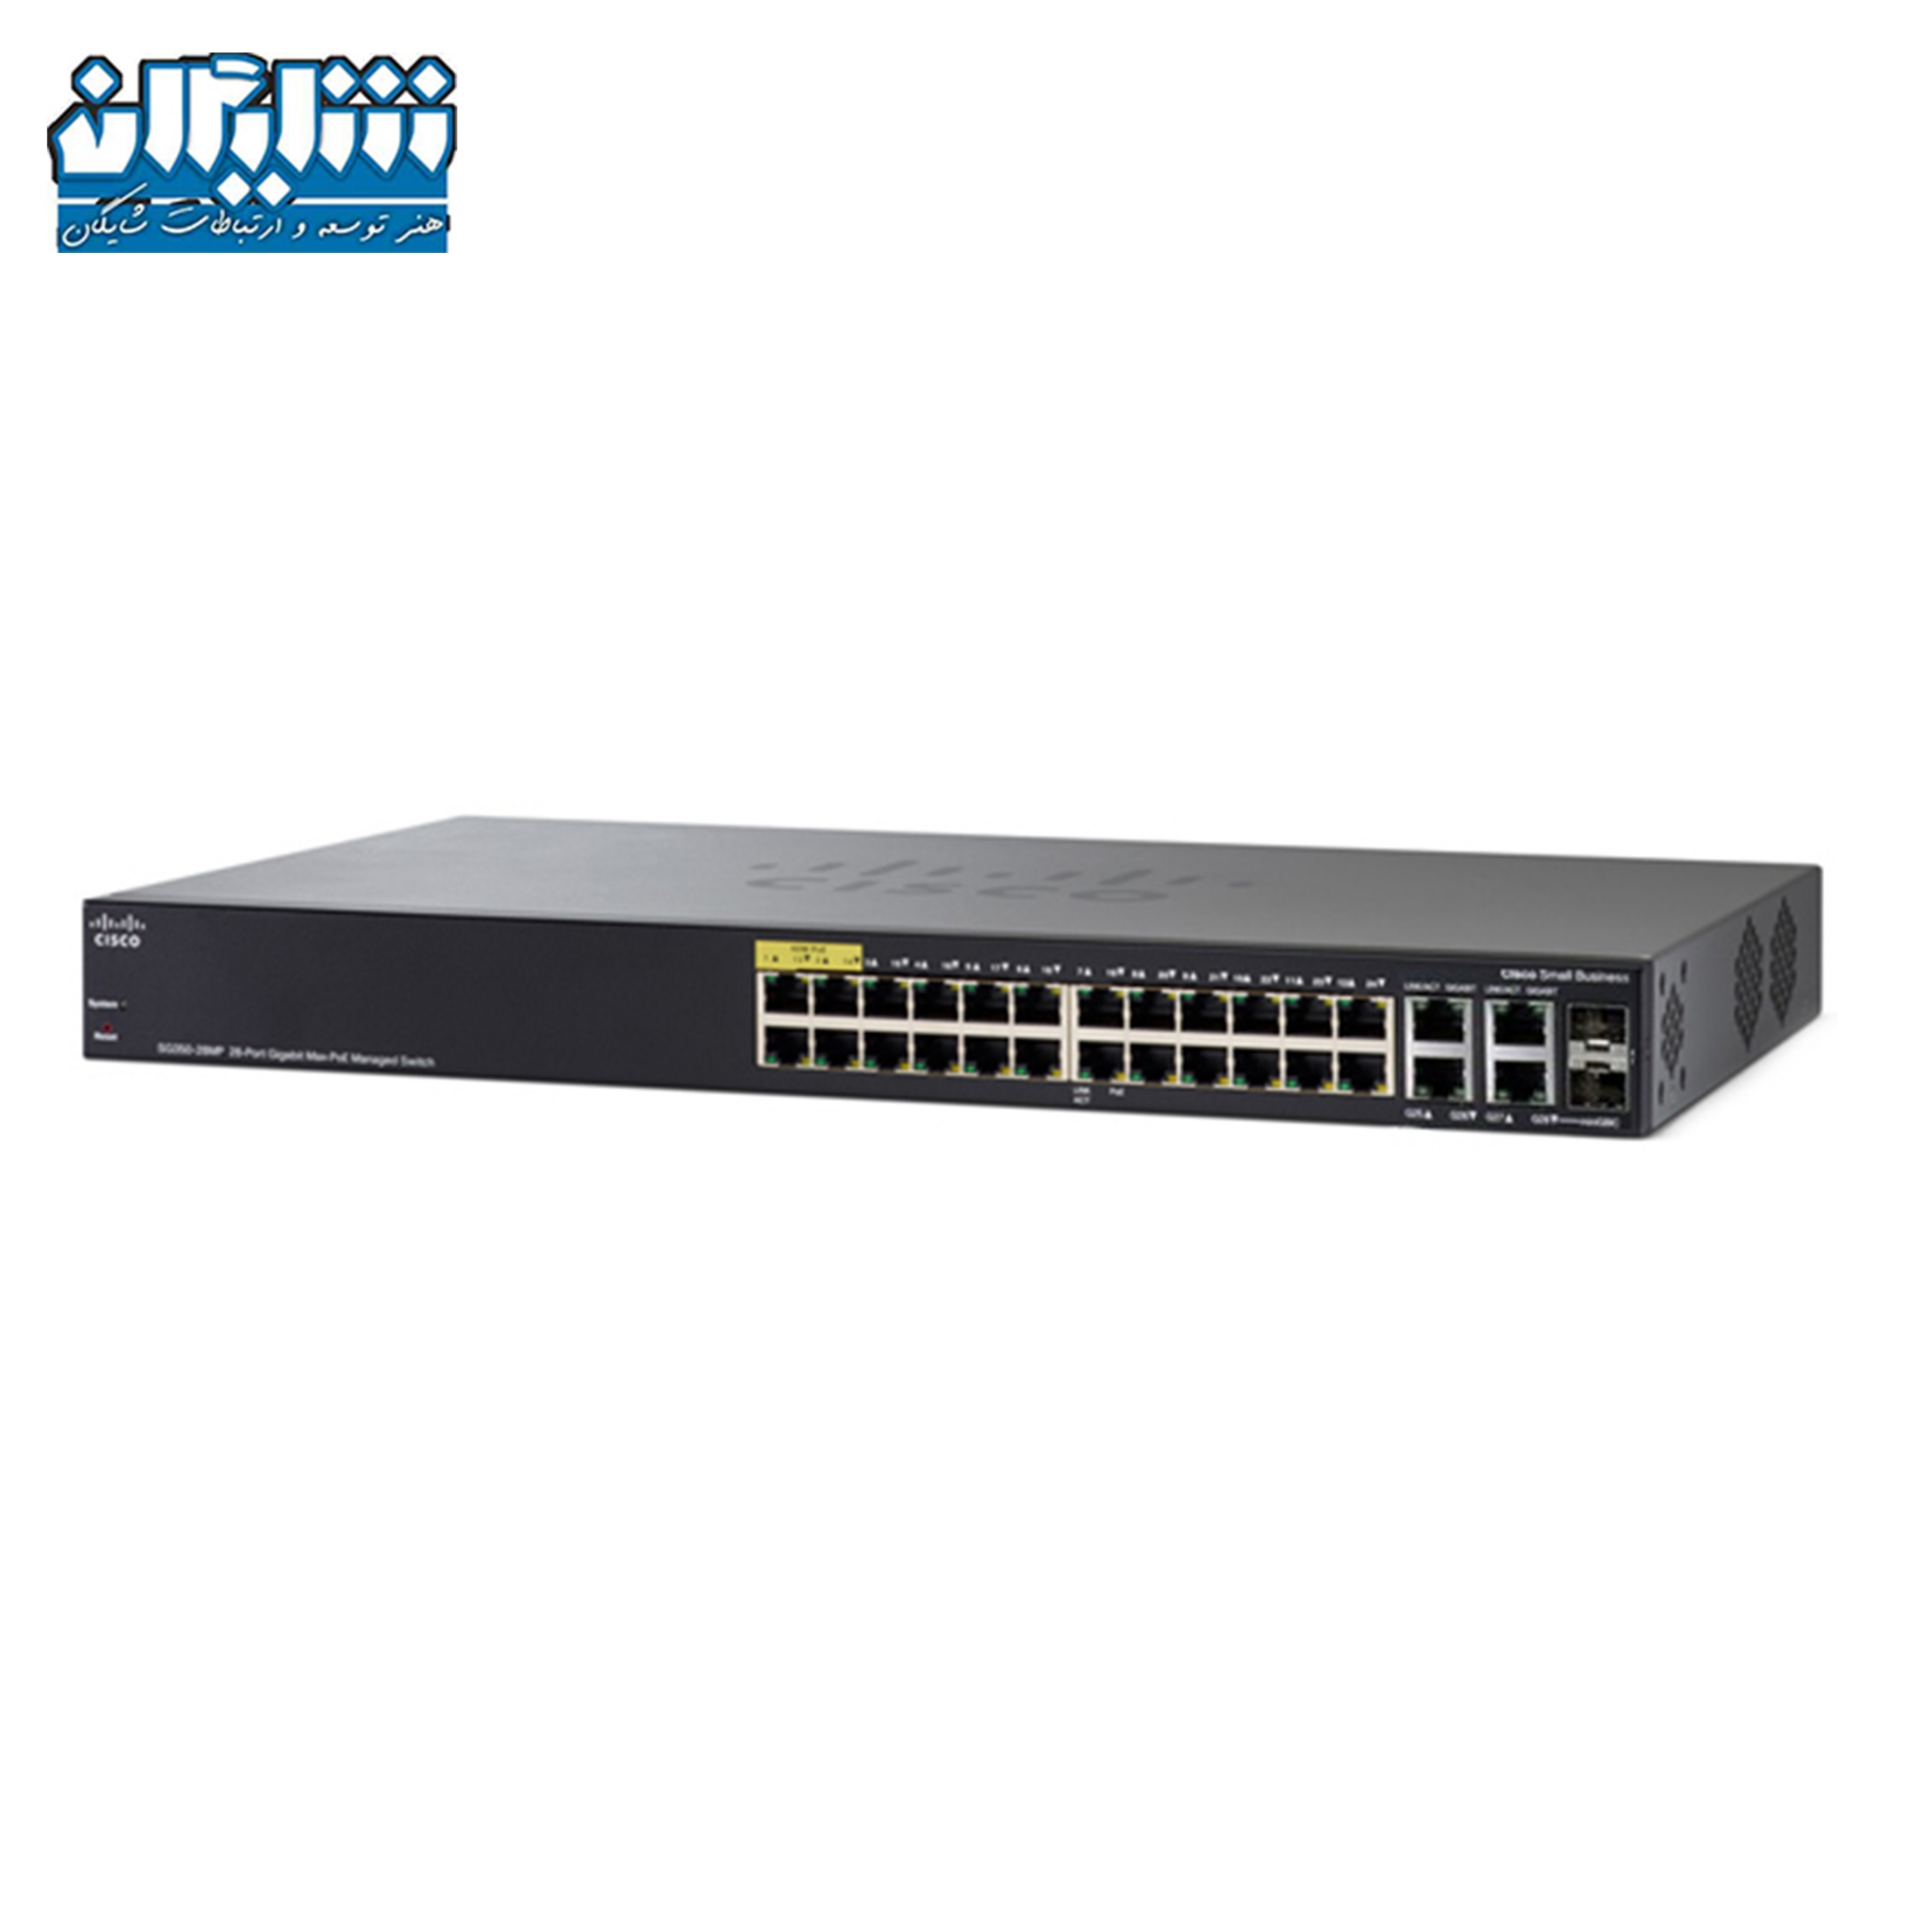 https://shayeganco.ir/fa/wp-content/uploads/2021/12/small-business-cisco-SG350-28P-scaled.jpg